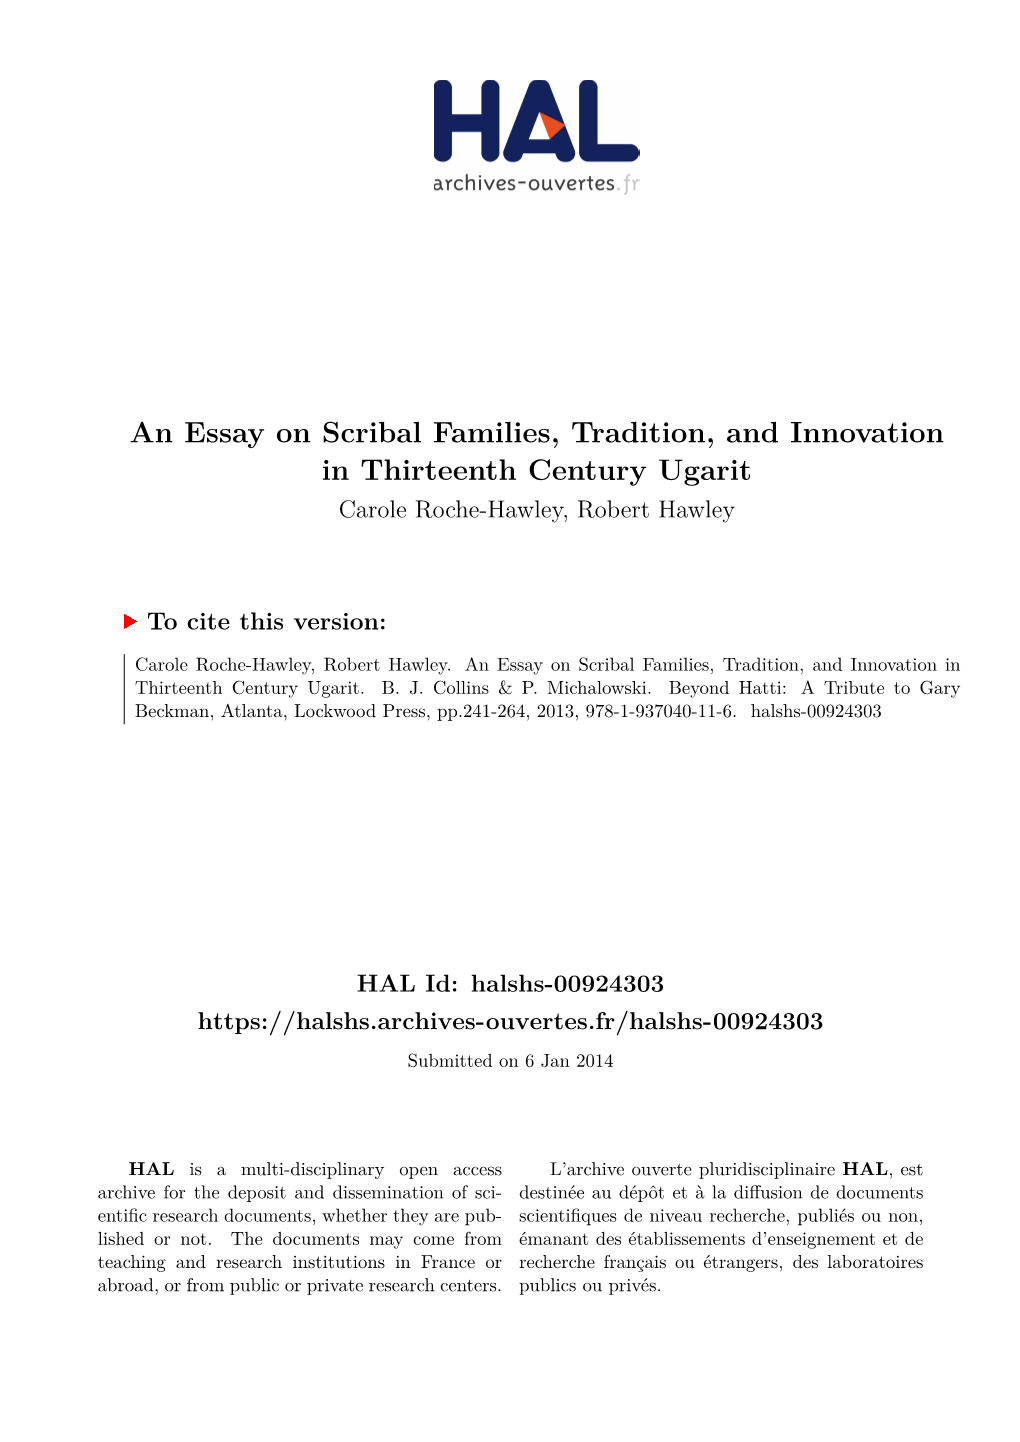 An Essay on Scribal Families, Tradition, and Innovation in Thirteenth Century Ugarit Carole Roche-Hawley, Robert Hawley